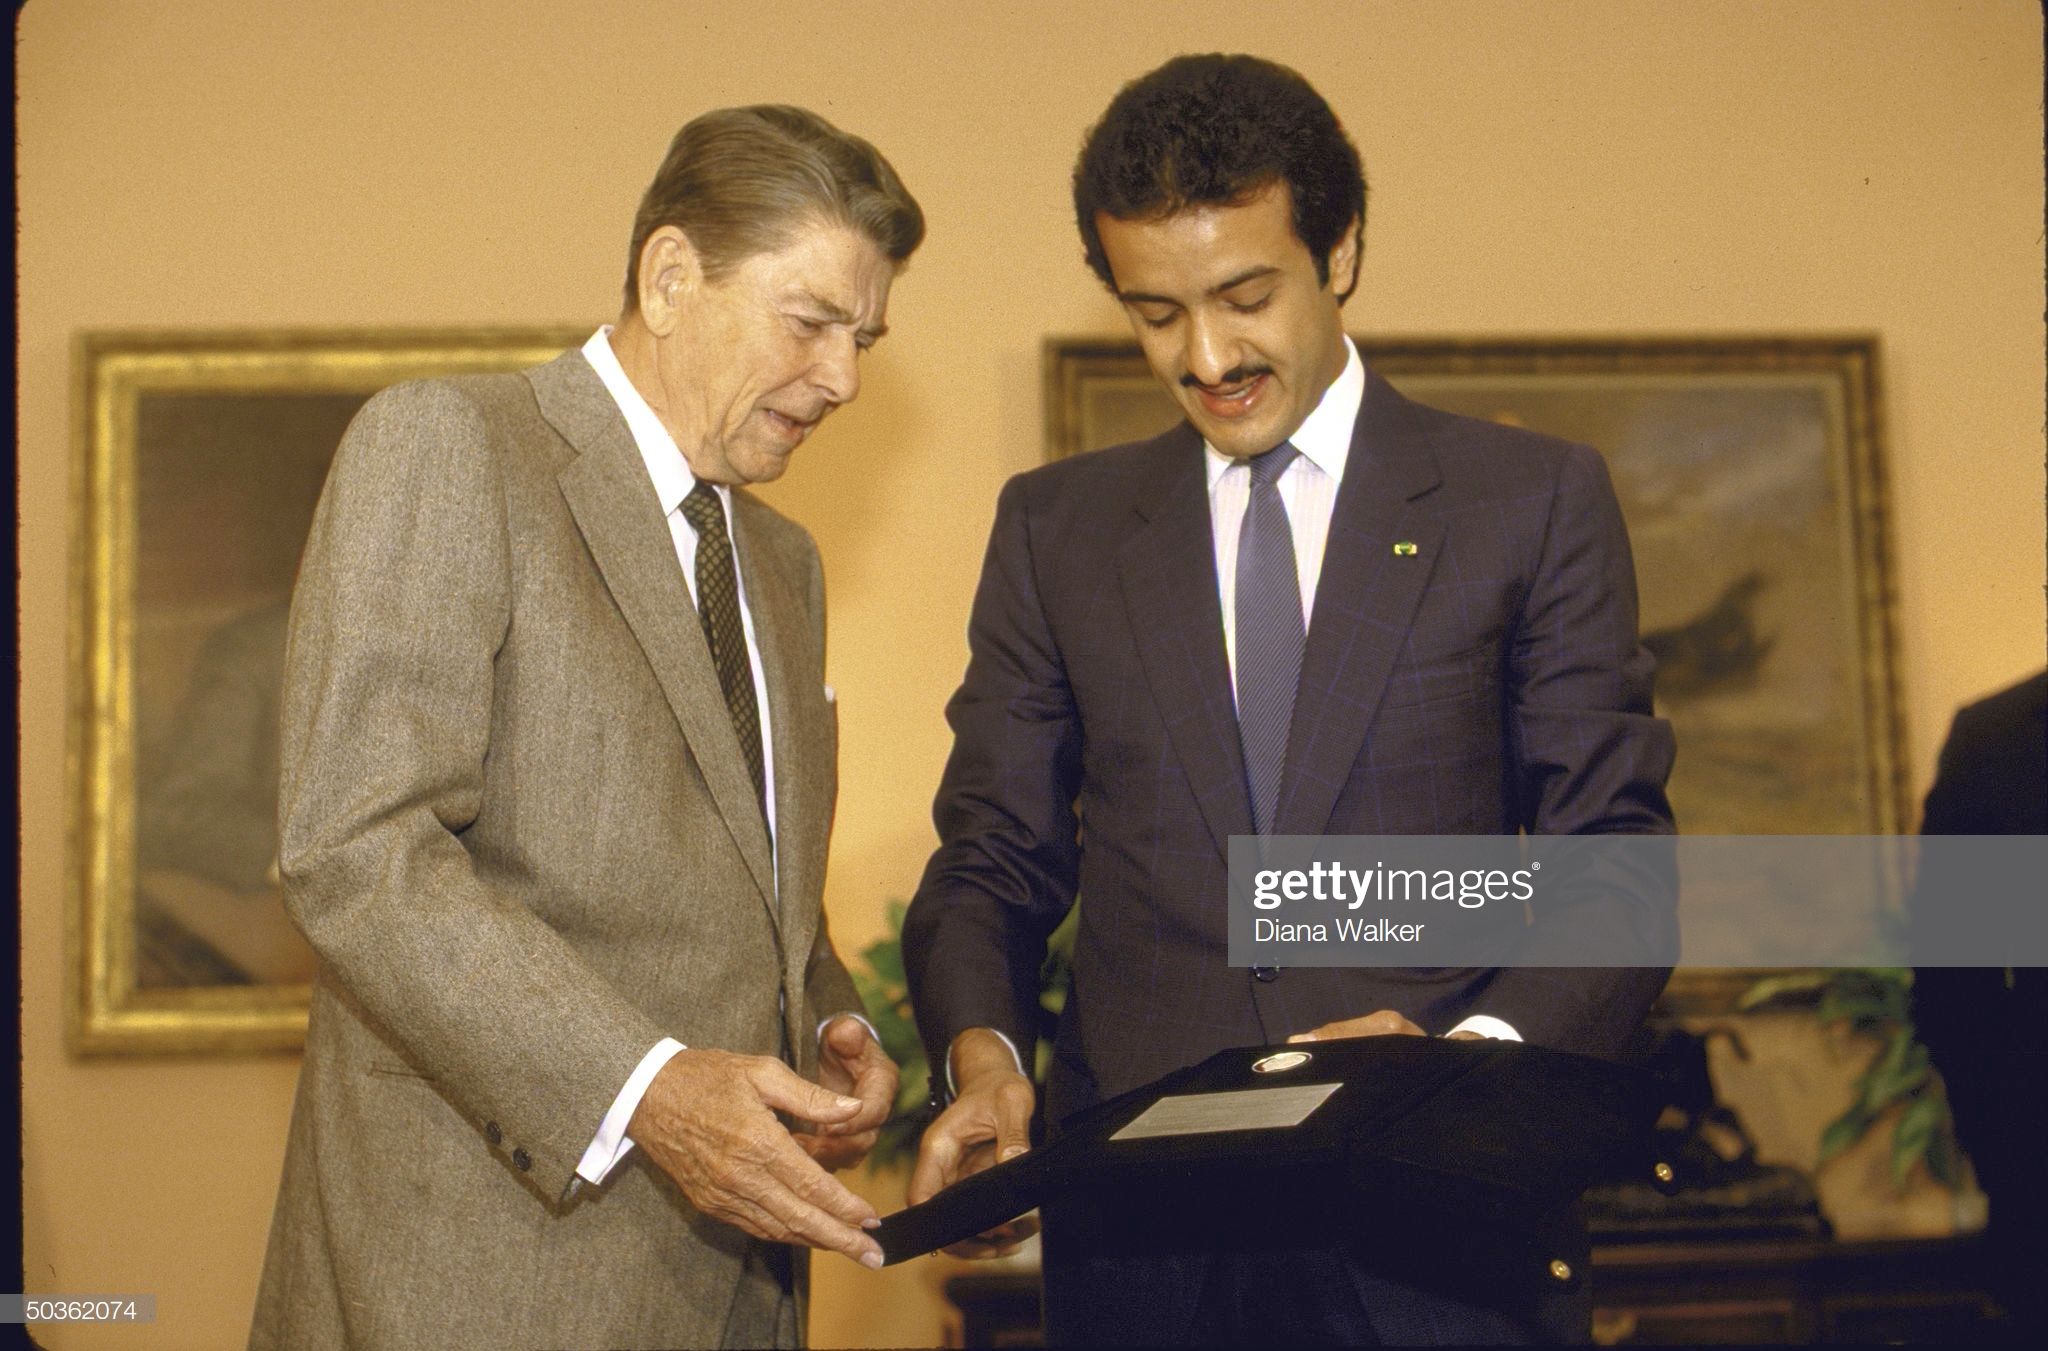 pres-ronald-w-reagan-meeting-with-astronaut-saudi-prince-sultan-al-picture-id50362074